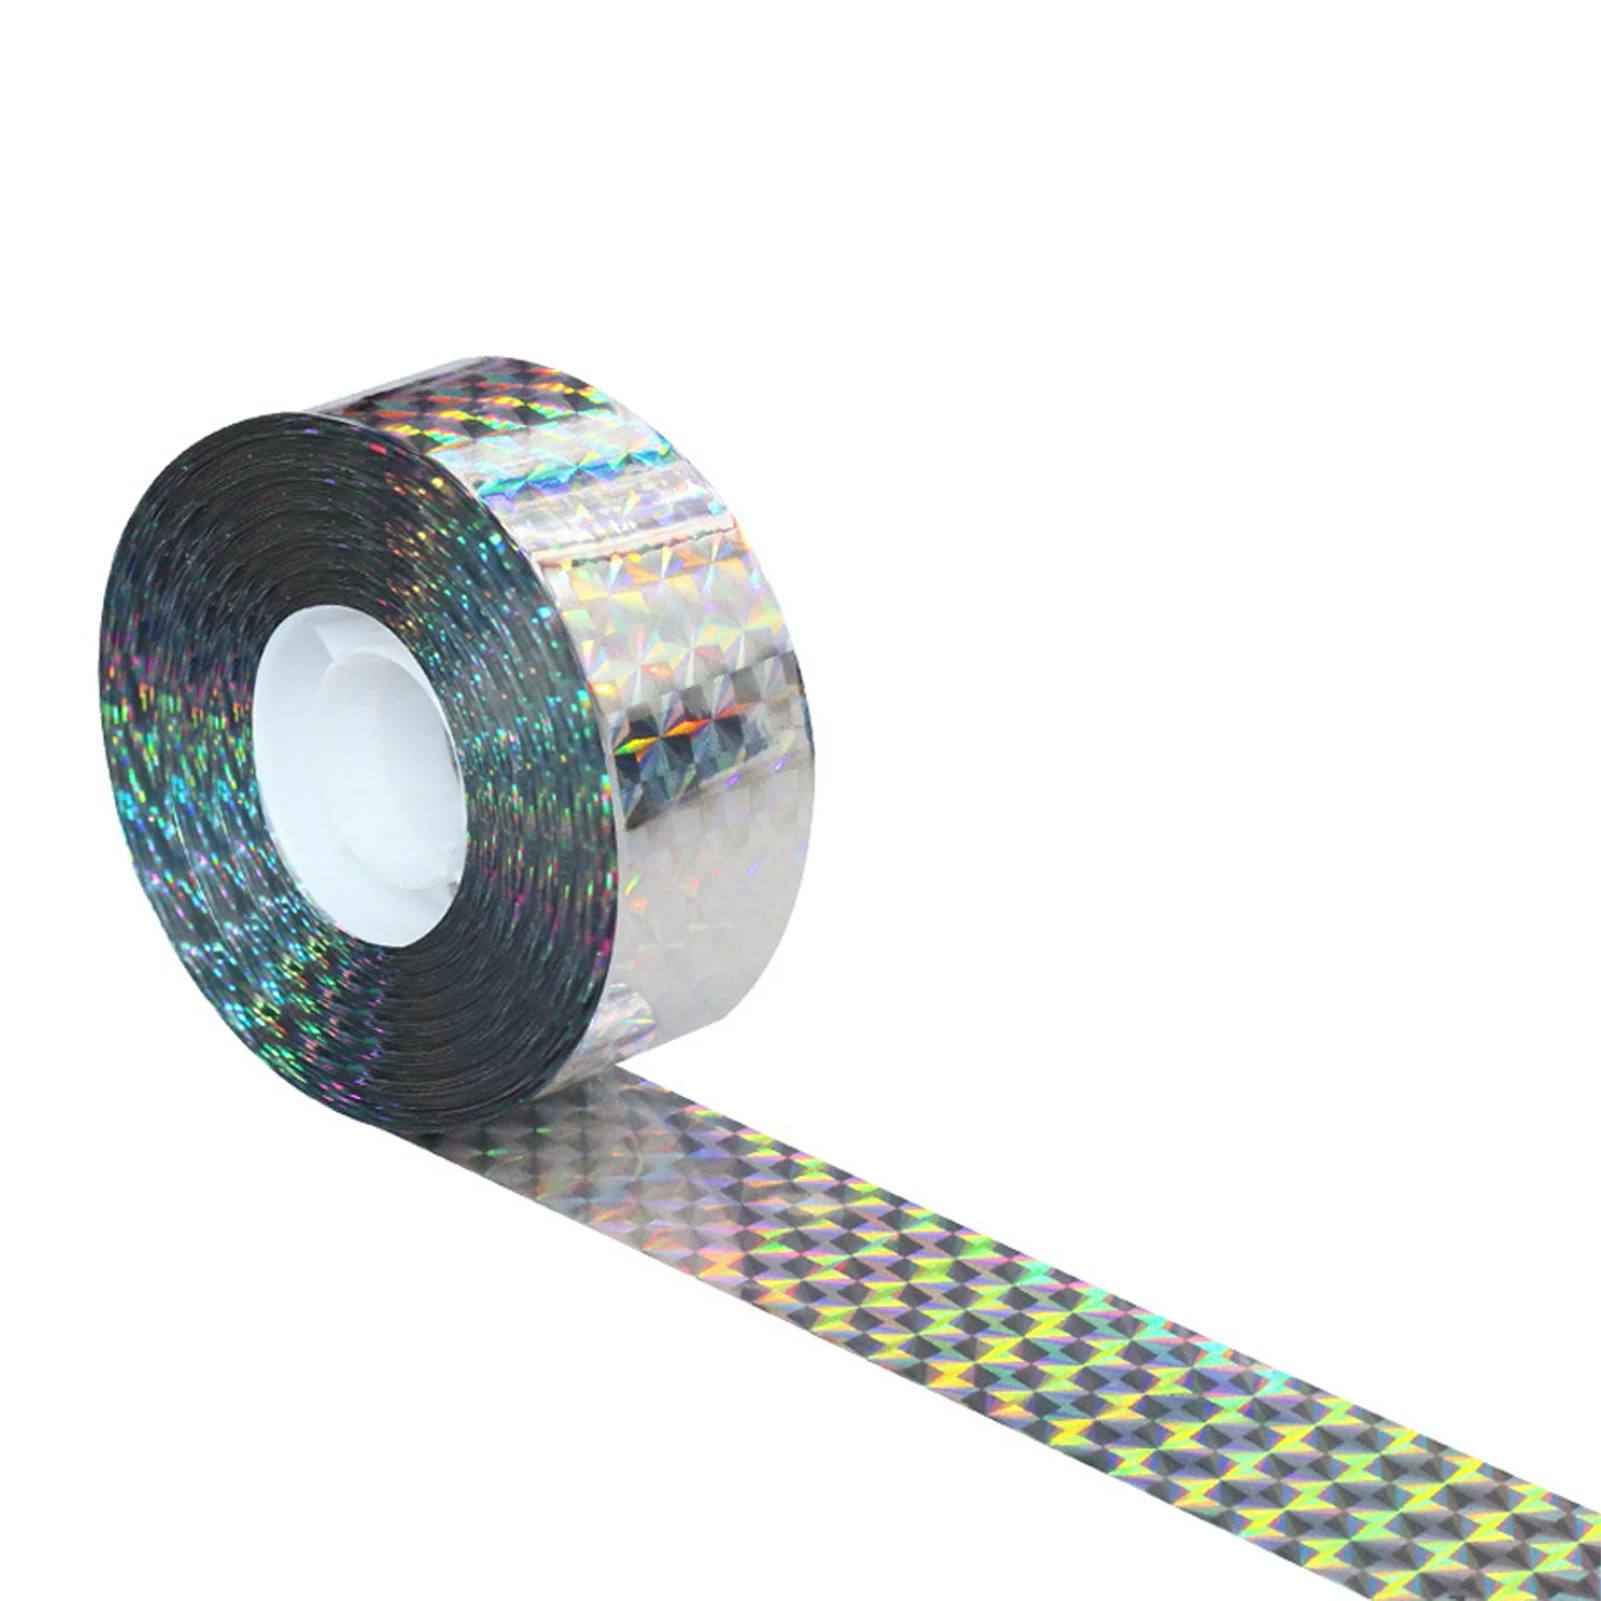 

Deterring Farm Hanging Double Sided Patio Reflective Ribbon Scare Tape Duck Outdoor Protect Crops Practical Bird Repellent